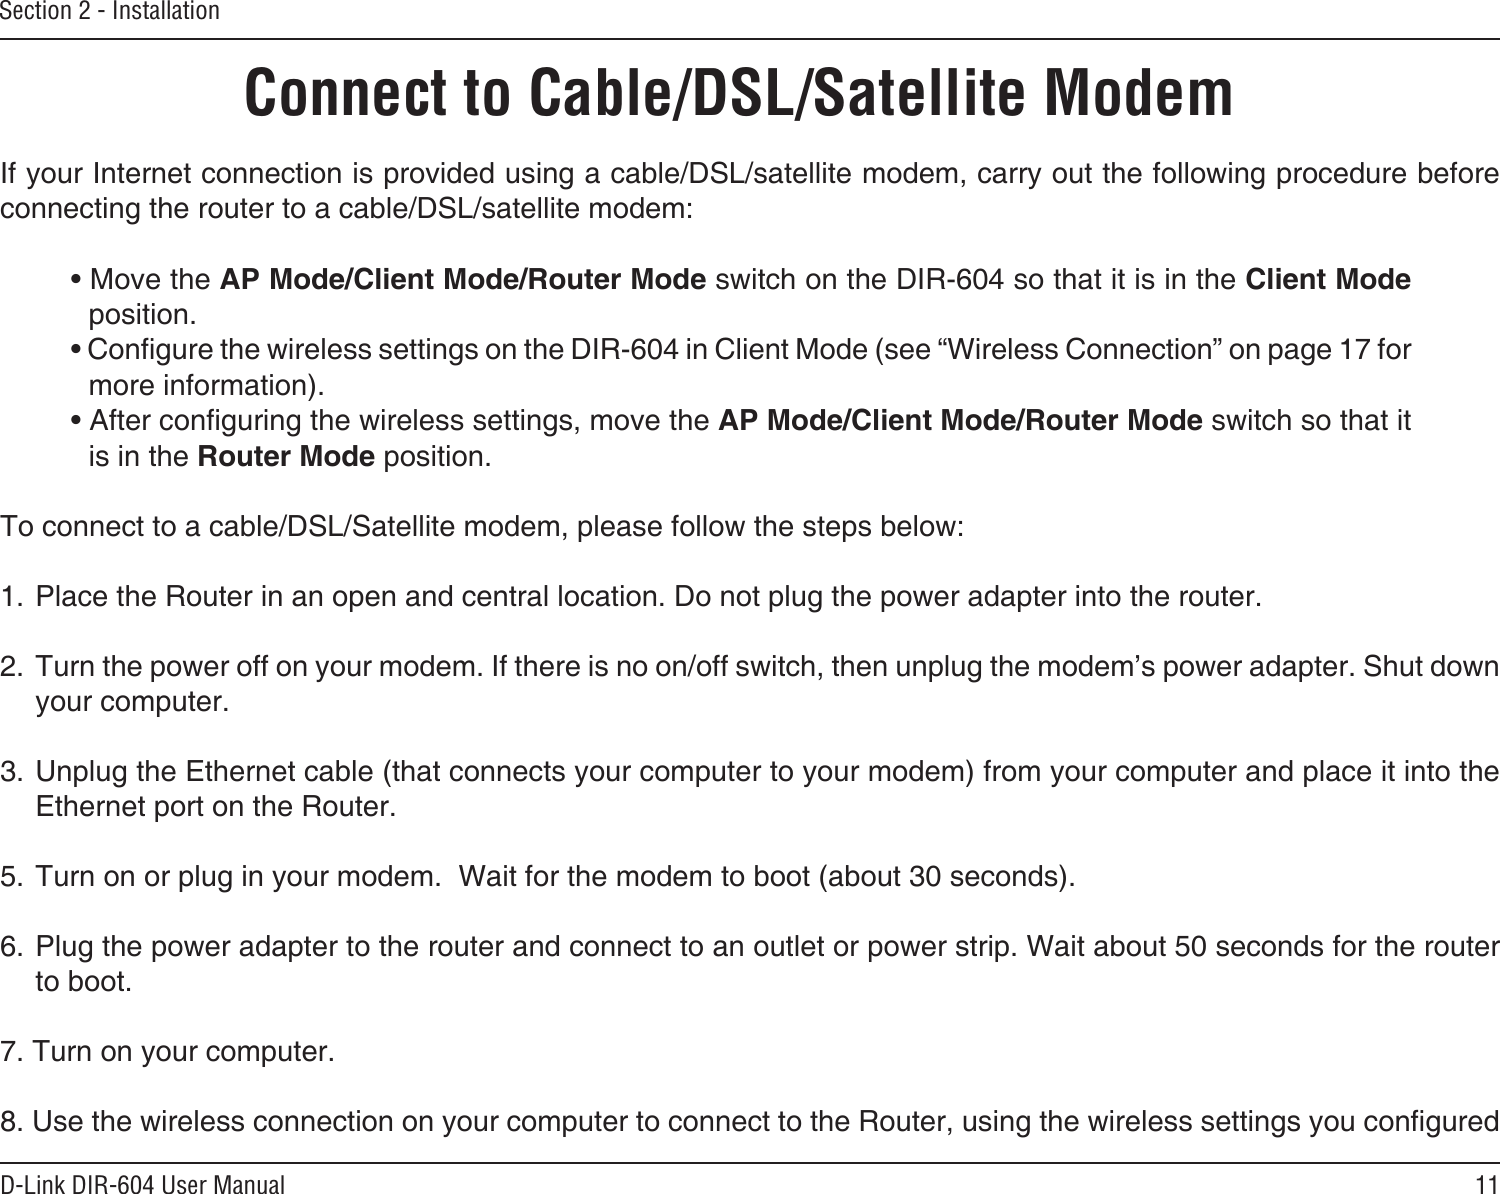 11D-Link DIR-604 User ManualSection 2 - InstallationIf your Internet connection is provided using a cable/DSL/satellite modem, carry out the following procedure before connecting the router to a cable/DSL/satellite modem:• Move the AP Mode/Client Mode/Router Mode switch on the DIR-604 so that it is in the Client Mode position.• Congure the wireless settings on the DIR-604 in Client Mode (see “Wireless Connection” on page 17 for more information).• After conguring the wireless settings, move the AP Mode/Client Mode/Router Mode switch so that it is in the Router Mode position.To connect to a cable/DSL/Satellite modem, please follow the steps below:1. Place the Router in an open and central location. Do not plug the power adapter into the router. 2. Turn the power off on your modem. If there is no on/off switch, then unplug the modem’s power adapter. Shut down your computer.3. Unplug the Ethernet cable (that connects your computer to your modem) from your computer and place it into the Ethernet port on the Router.  5. Turn on or plug in your modem.  Wait for the modem to boot (about 30 seconds). 6. Plug the power adapter to the router and connect to an outlet or power strip. Wait about 50 seconds for the router to boot. 7. Turn on your computer. 8. Use the wireless connection on your computer to connect to the Router, using the wireless settings you congured Connect to Cable/DSL/Satellite Modem